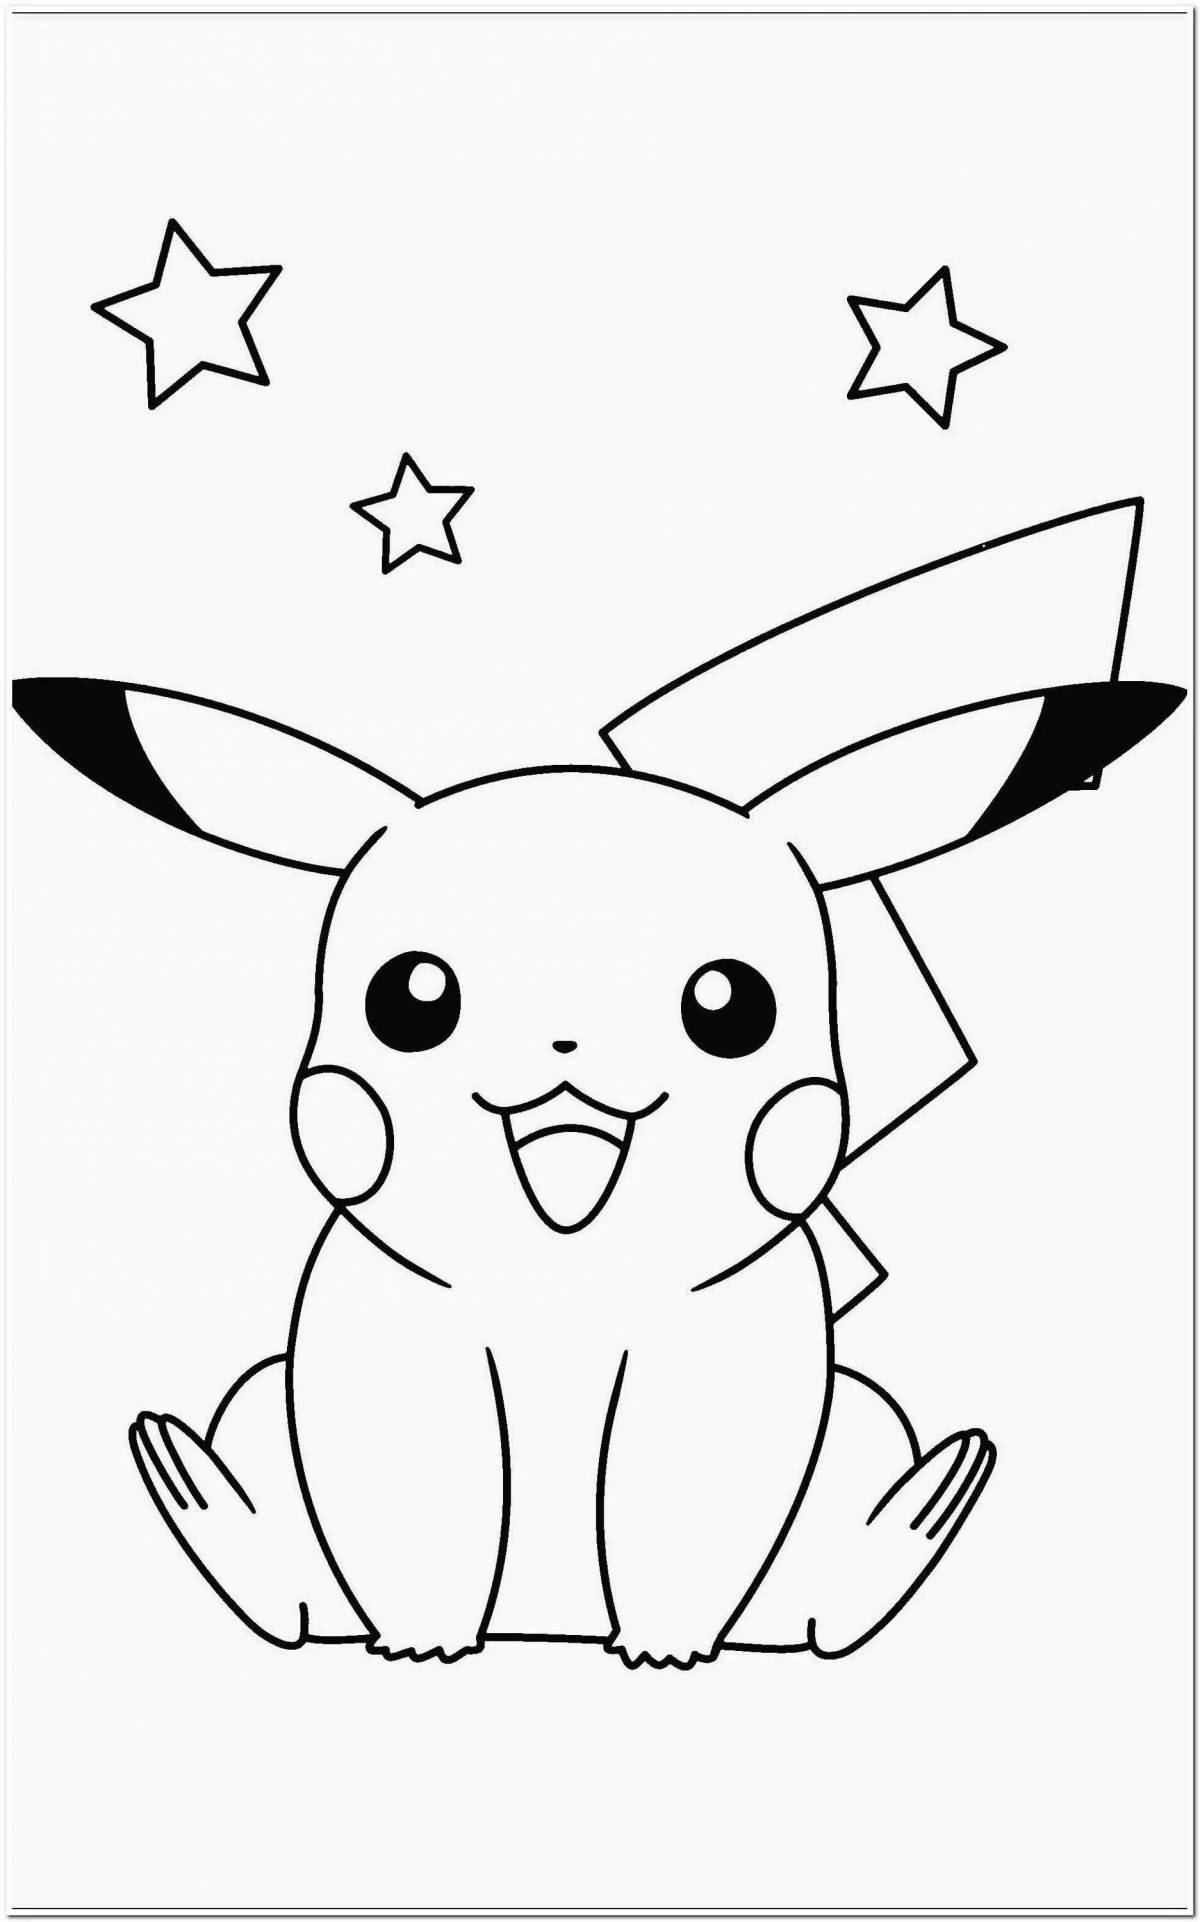 Colouring funny pikachu with a heart